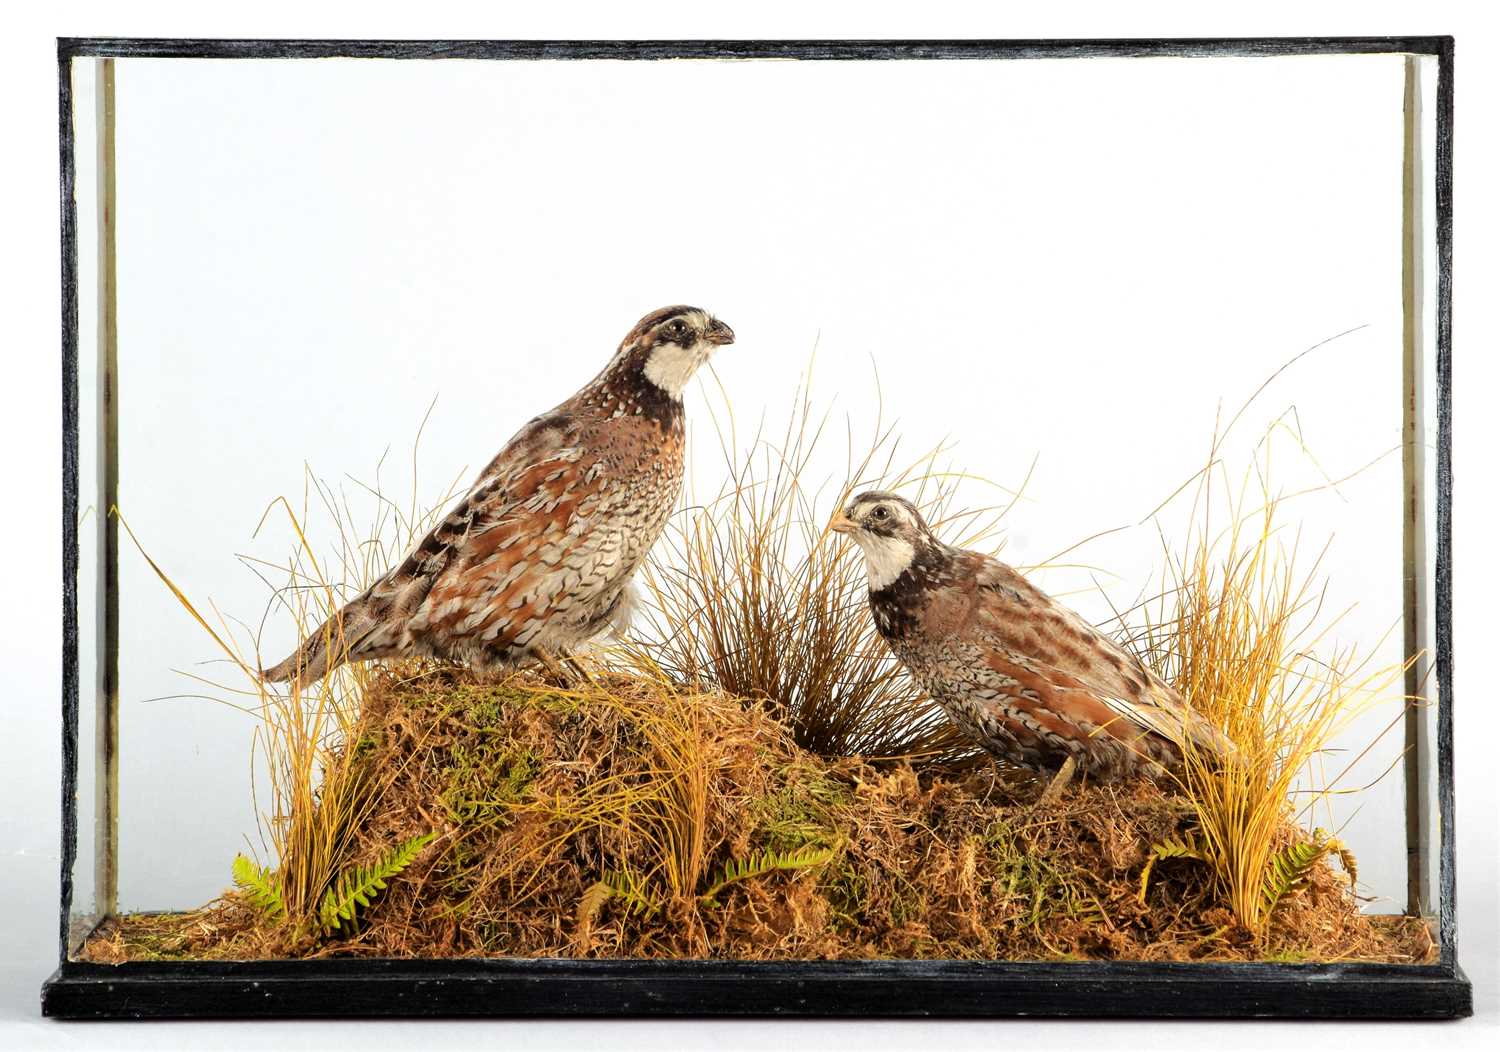 Taxidermy: A Cased Pair of Northern Bobwhite Quail (Colinus virginianus), circa early-mid 20th